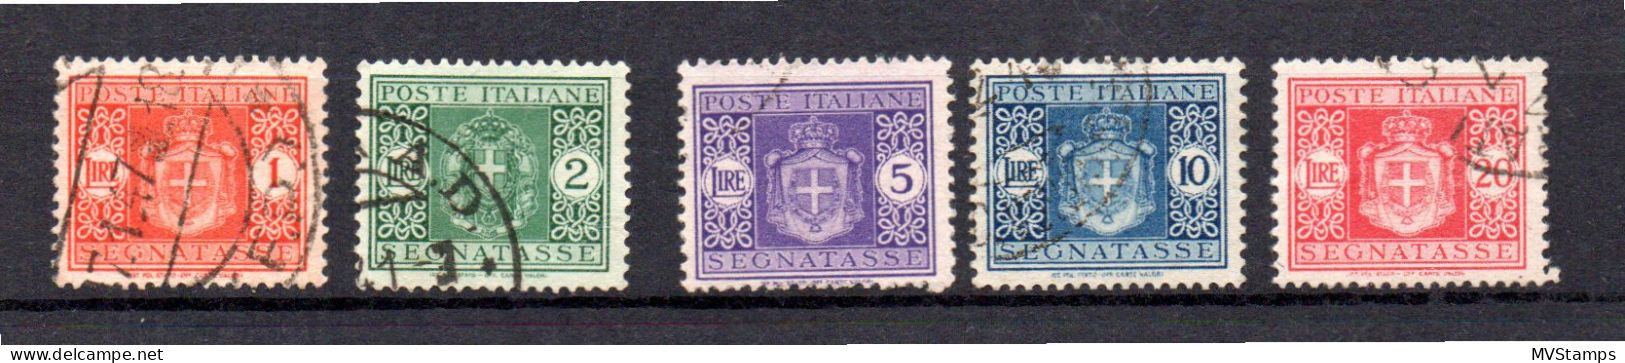 Italy 1945 Set Postage-Due Stamps (Michel P 69/73) Used - Taxe